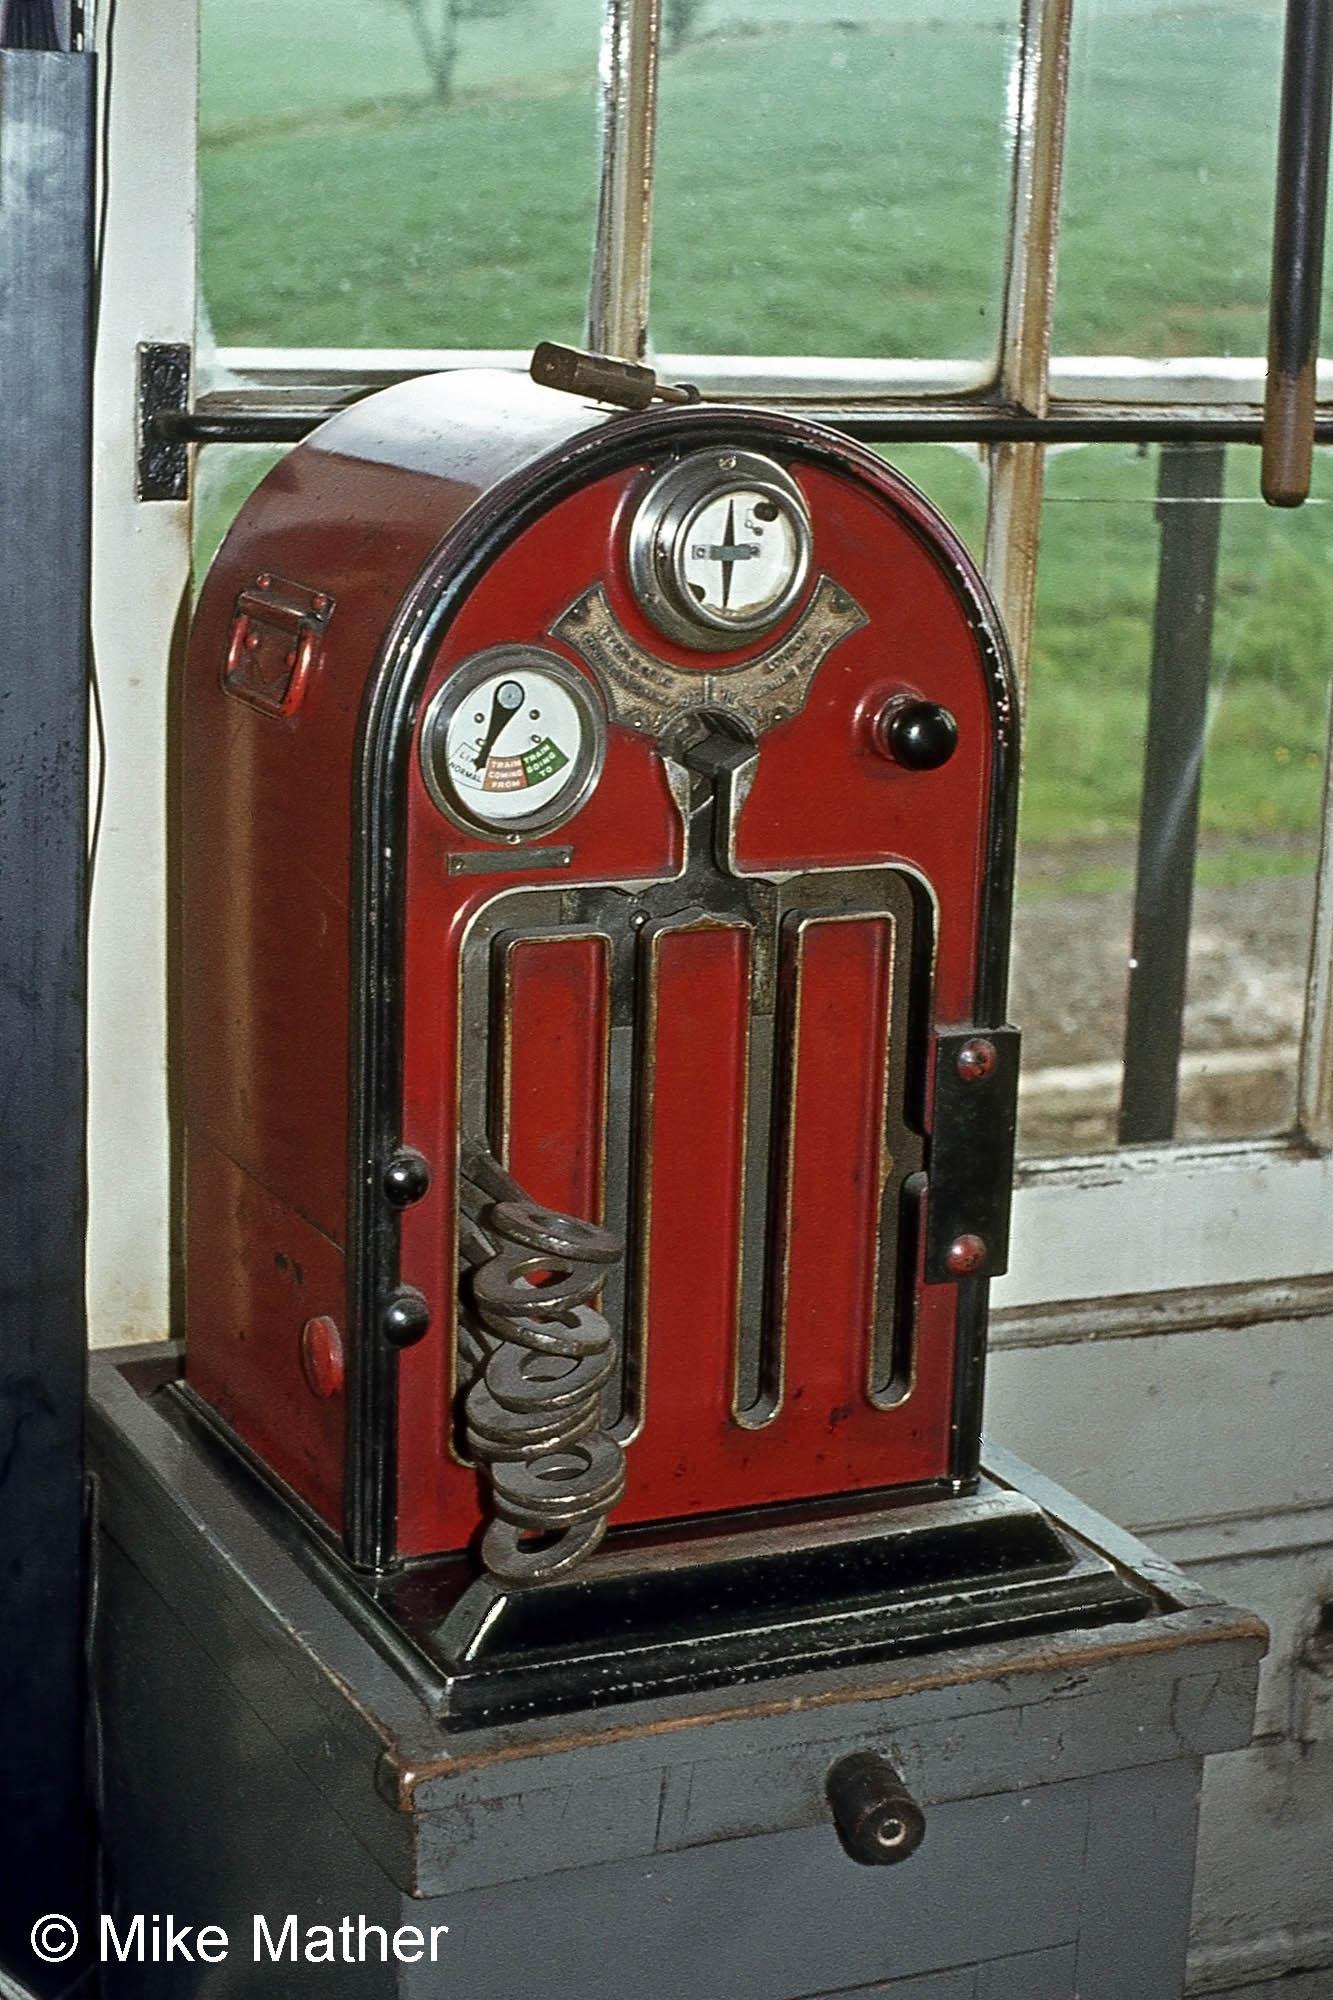 The Tyers Electric Key Token instrument at High Dyke. This instrument allowed a key token to be issued to the driver of a train which was to travel on the single line to Colsterworth as authority to use the single line. There was an identical instrument at Colsterworth signal box, and the two were electrically connected so that only one key token could be removed from the pair of instruments. Once a key token has been withdrawn from either instrument both instruments become locked until the token is replaced in eithe of them. Thus a driver who has been given a token knows that there can be no other train on the section. Photograph by Mike Mather 